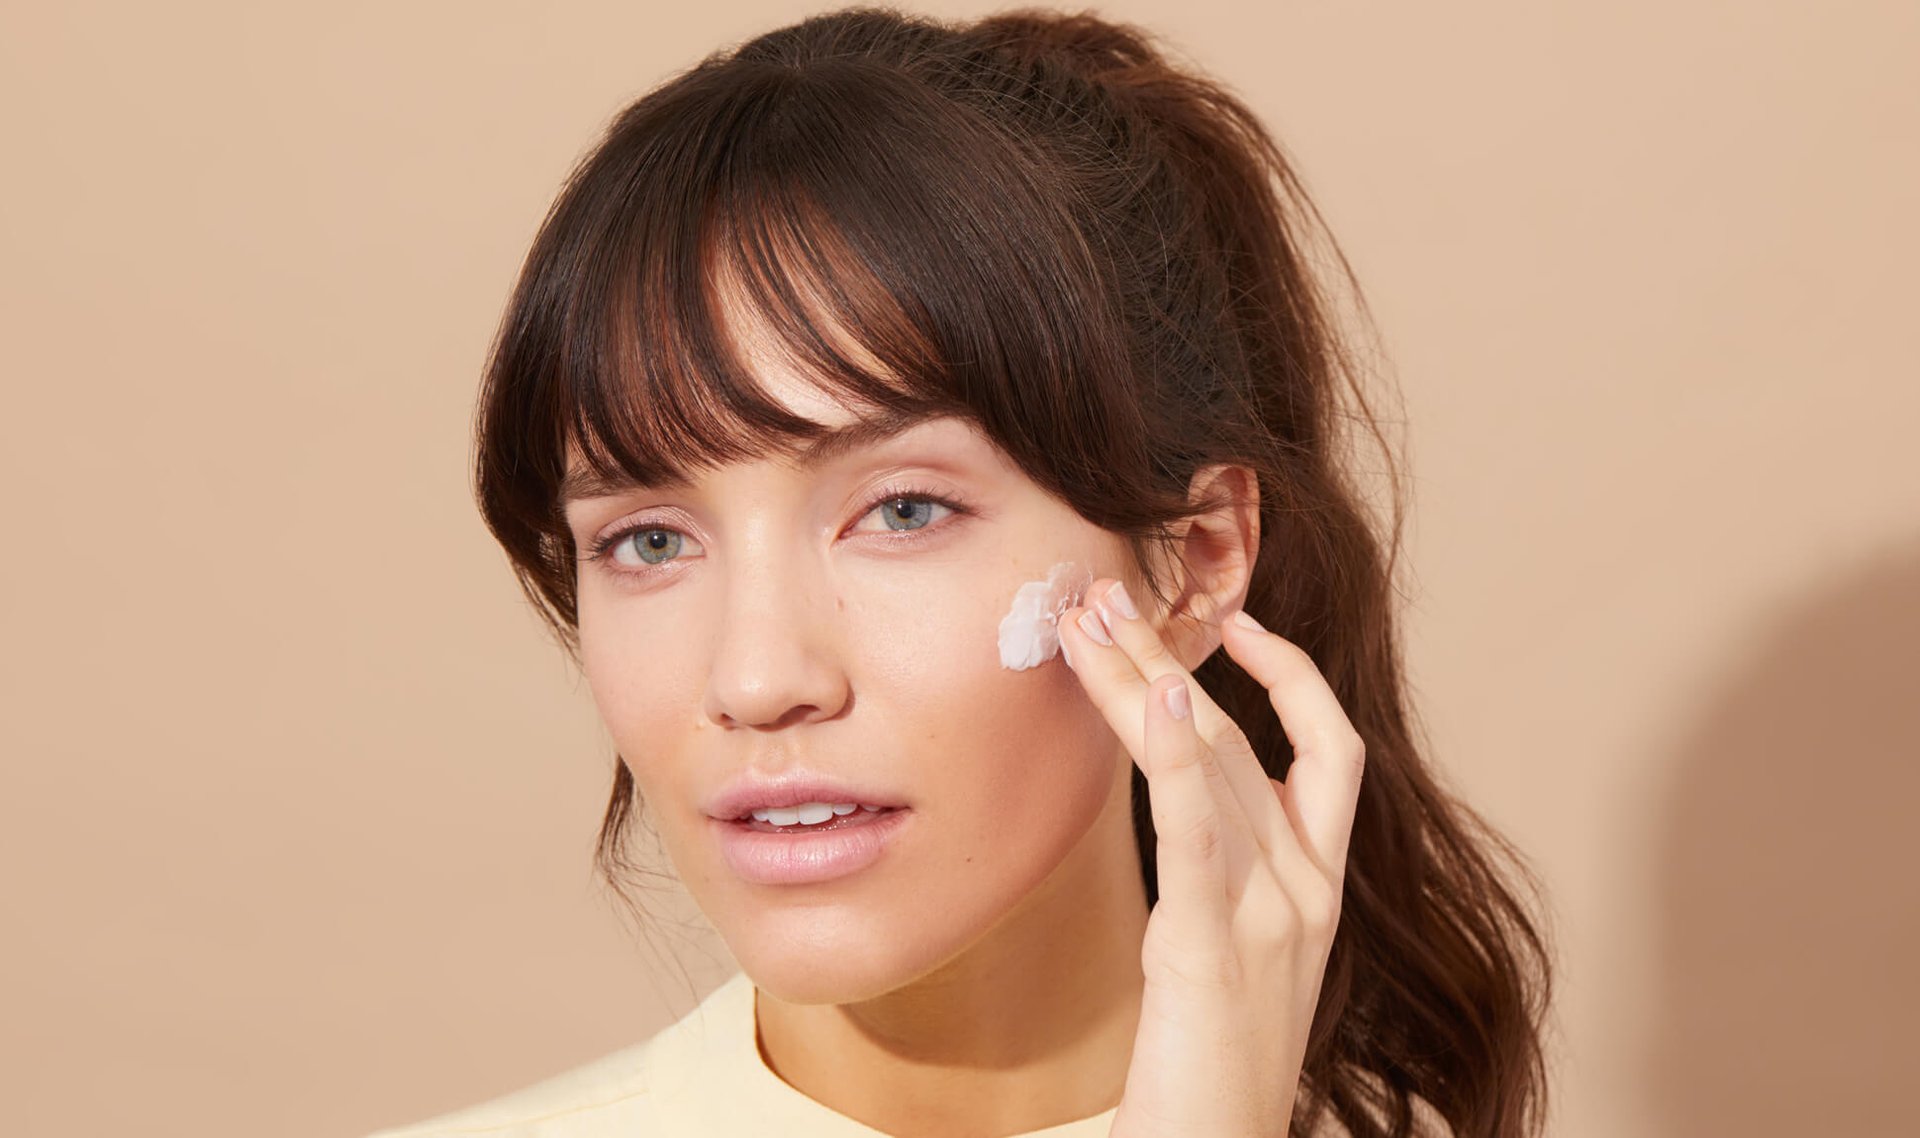 Are Your Bangs Causing Breakouts? The Answer Might Surprise You